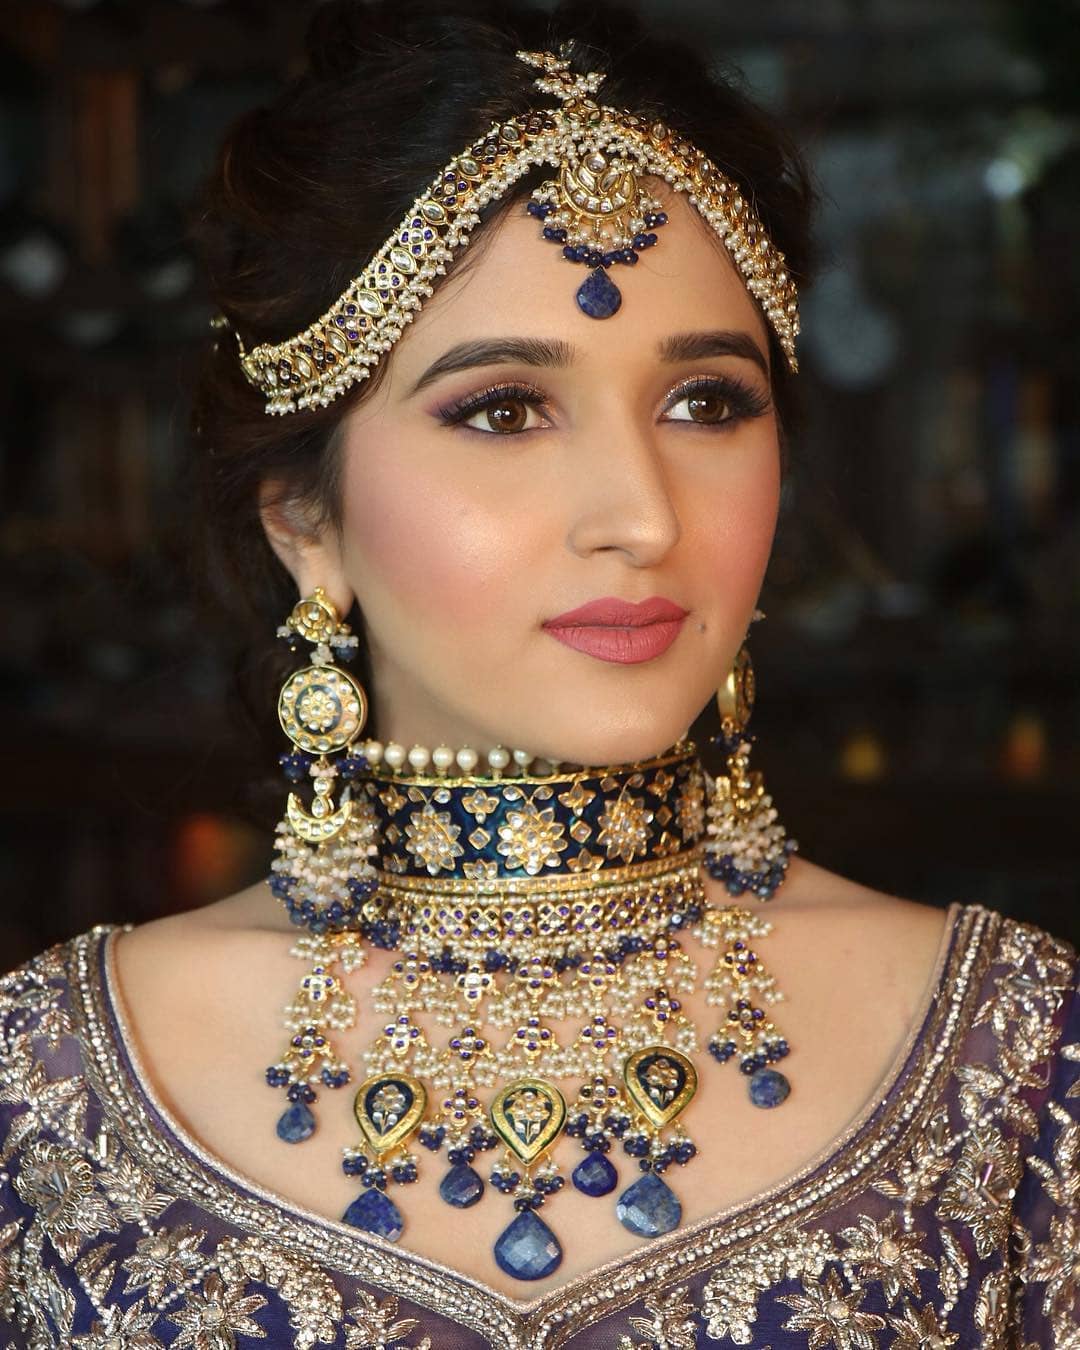 Nidhi Shah Radiant Bridal Look: Best Bridal Makeup Inspirations to bring out Diva in You